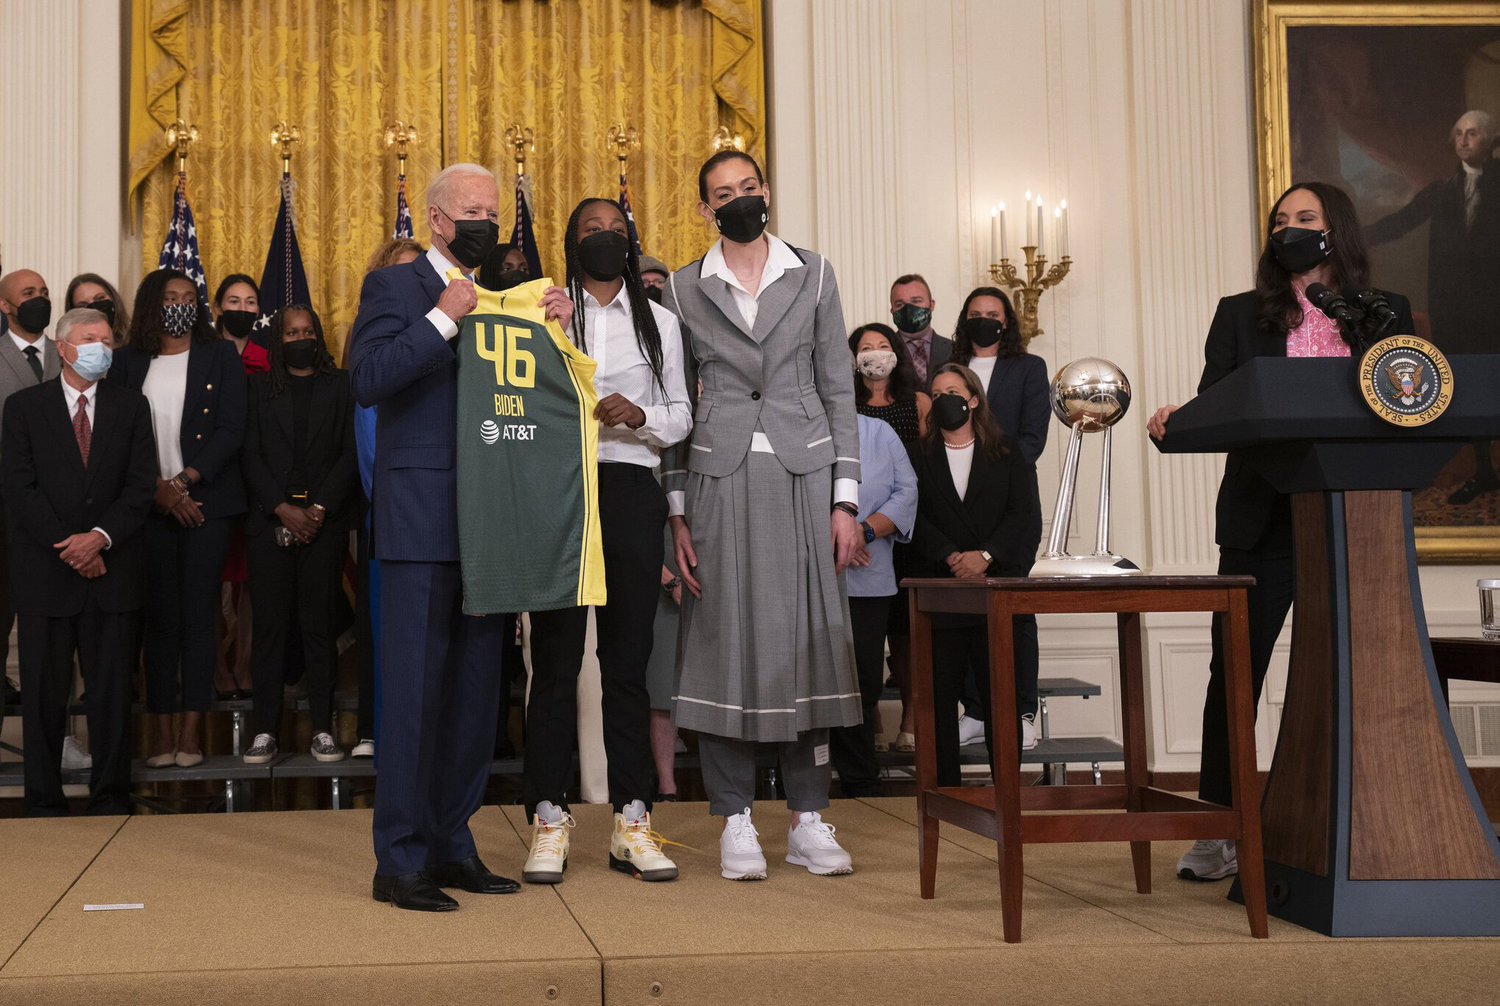 Storm players Jewell Loyd, center, and Breanna Stewart present a No. 46 jersey to President Joe Biden on Monday during a White House ceremony celebrating their 2020 WNBA championship.